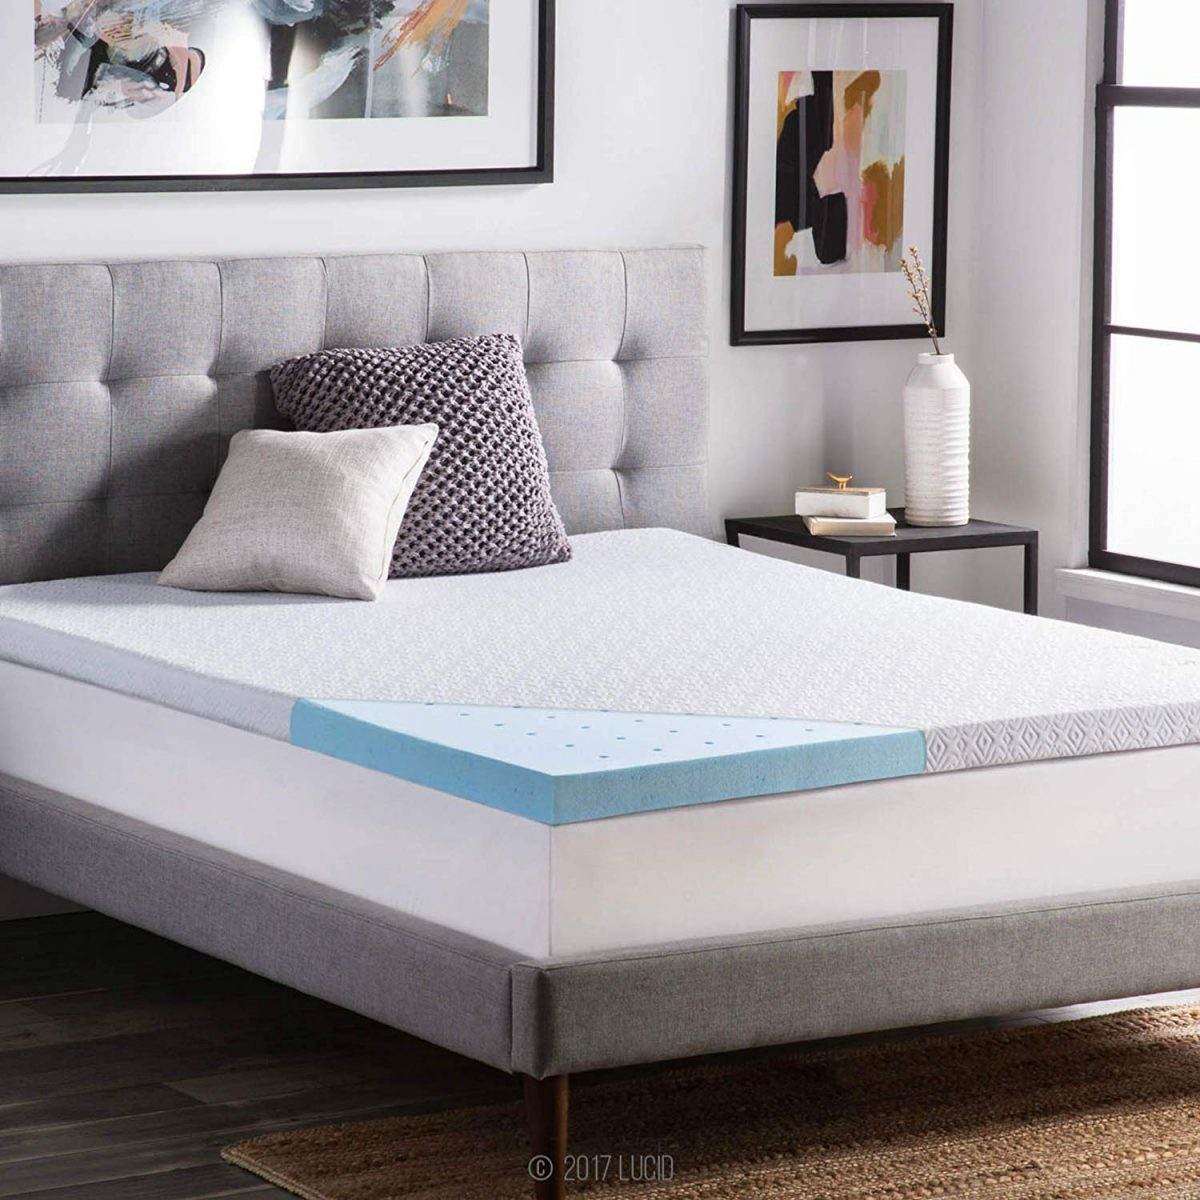 Father's Day Gift Guide: Best for Hot Sleepers- LUCID Gel Infused Ventilated Memory Foam Mattress Topper